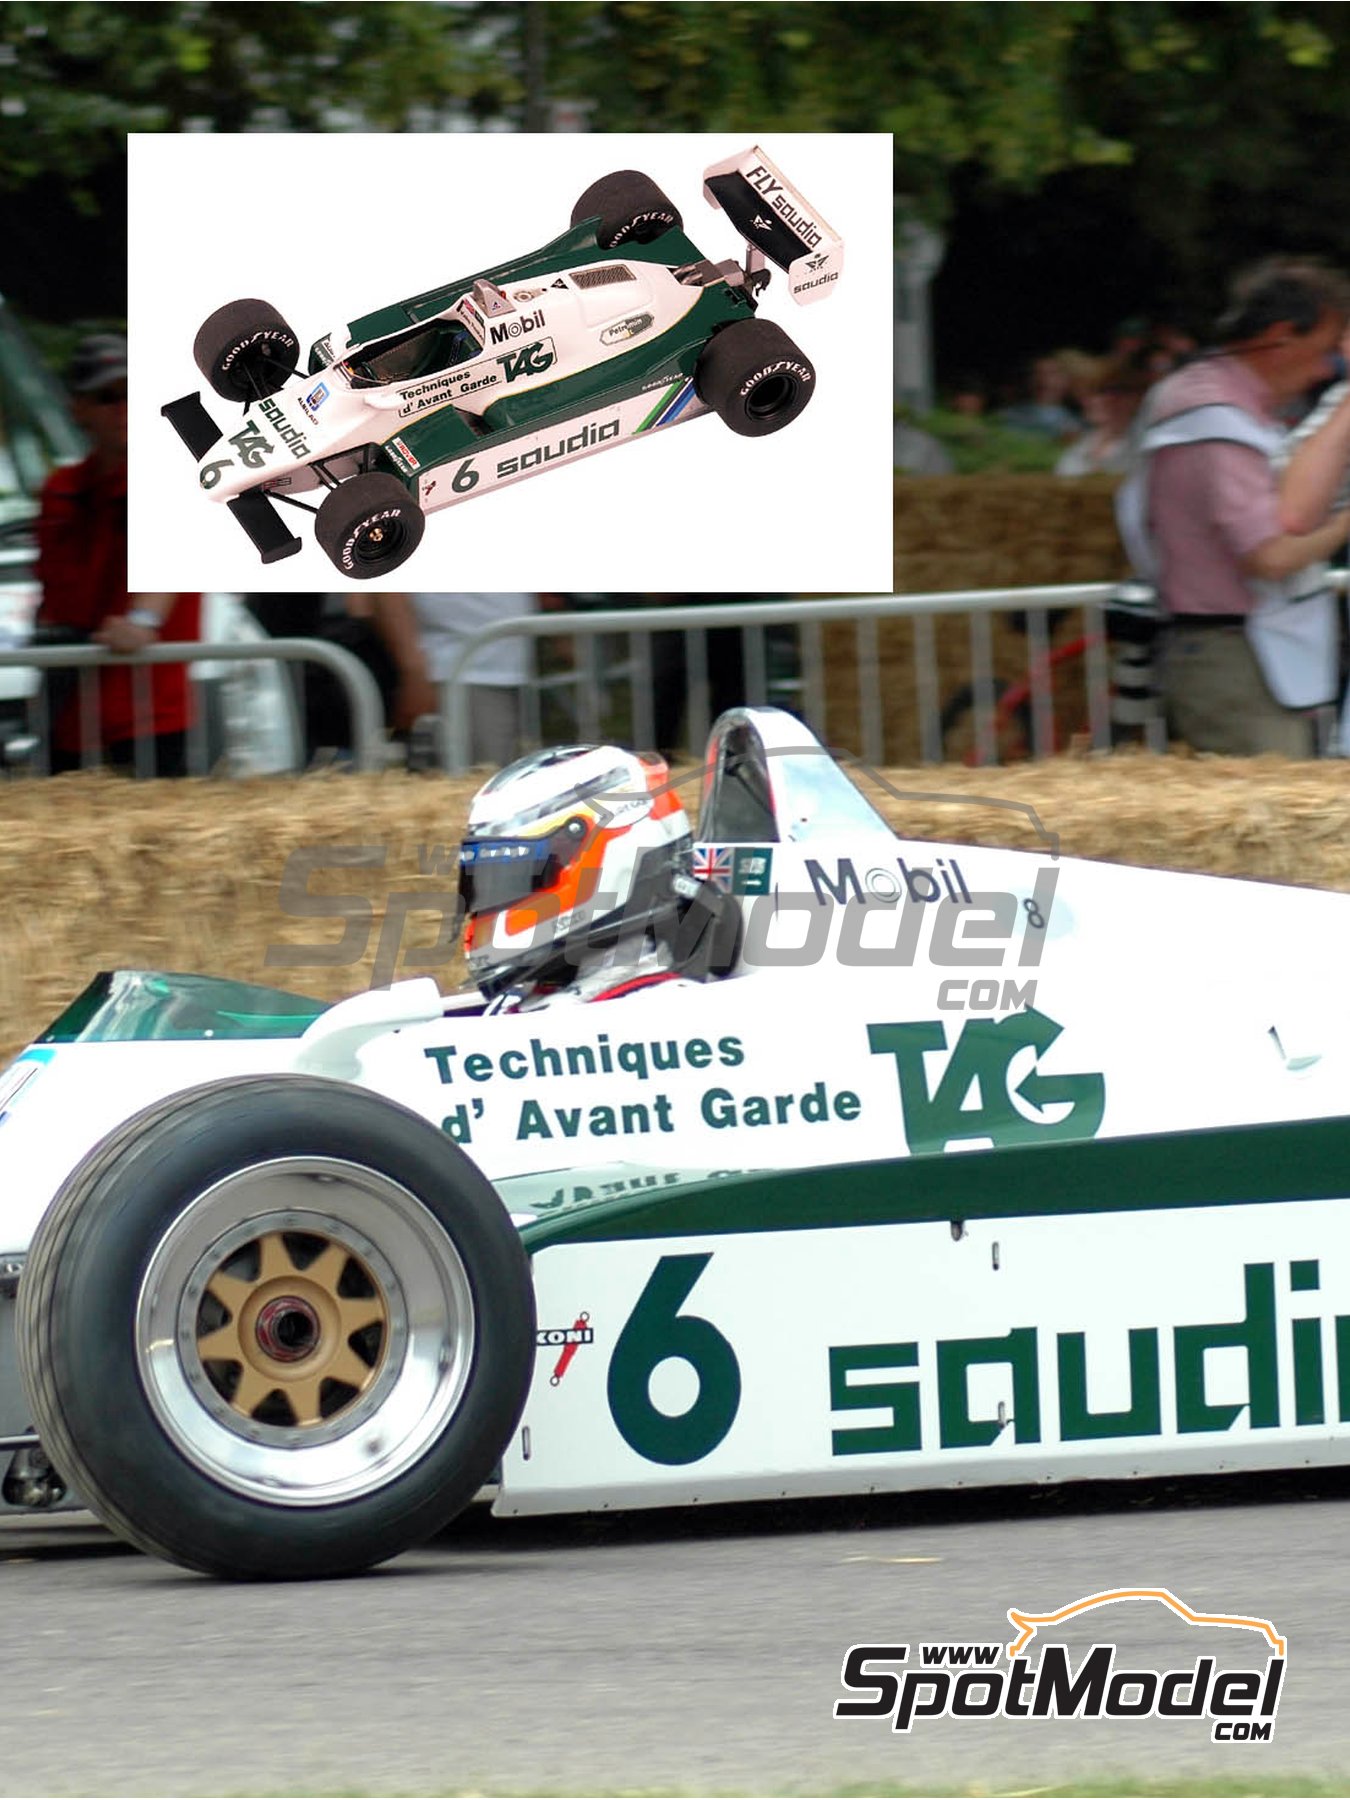 Williams Ford FW08 Williams Grand Prix Engineering Team sponsored by TAG  Saudia - Swedish Formula 1 Grand Prix 1982. Car scale model kit in 1/43  scale